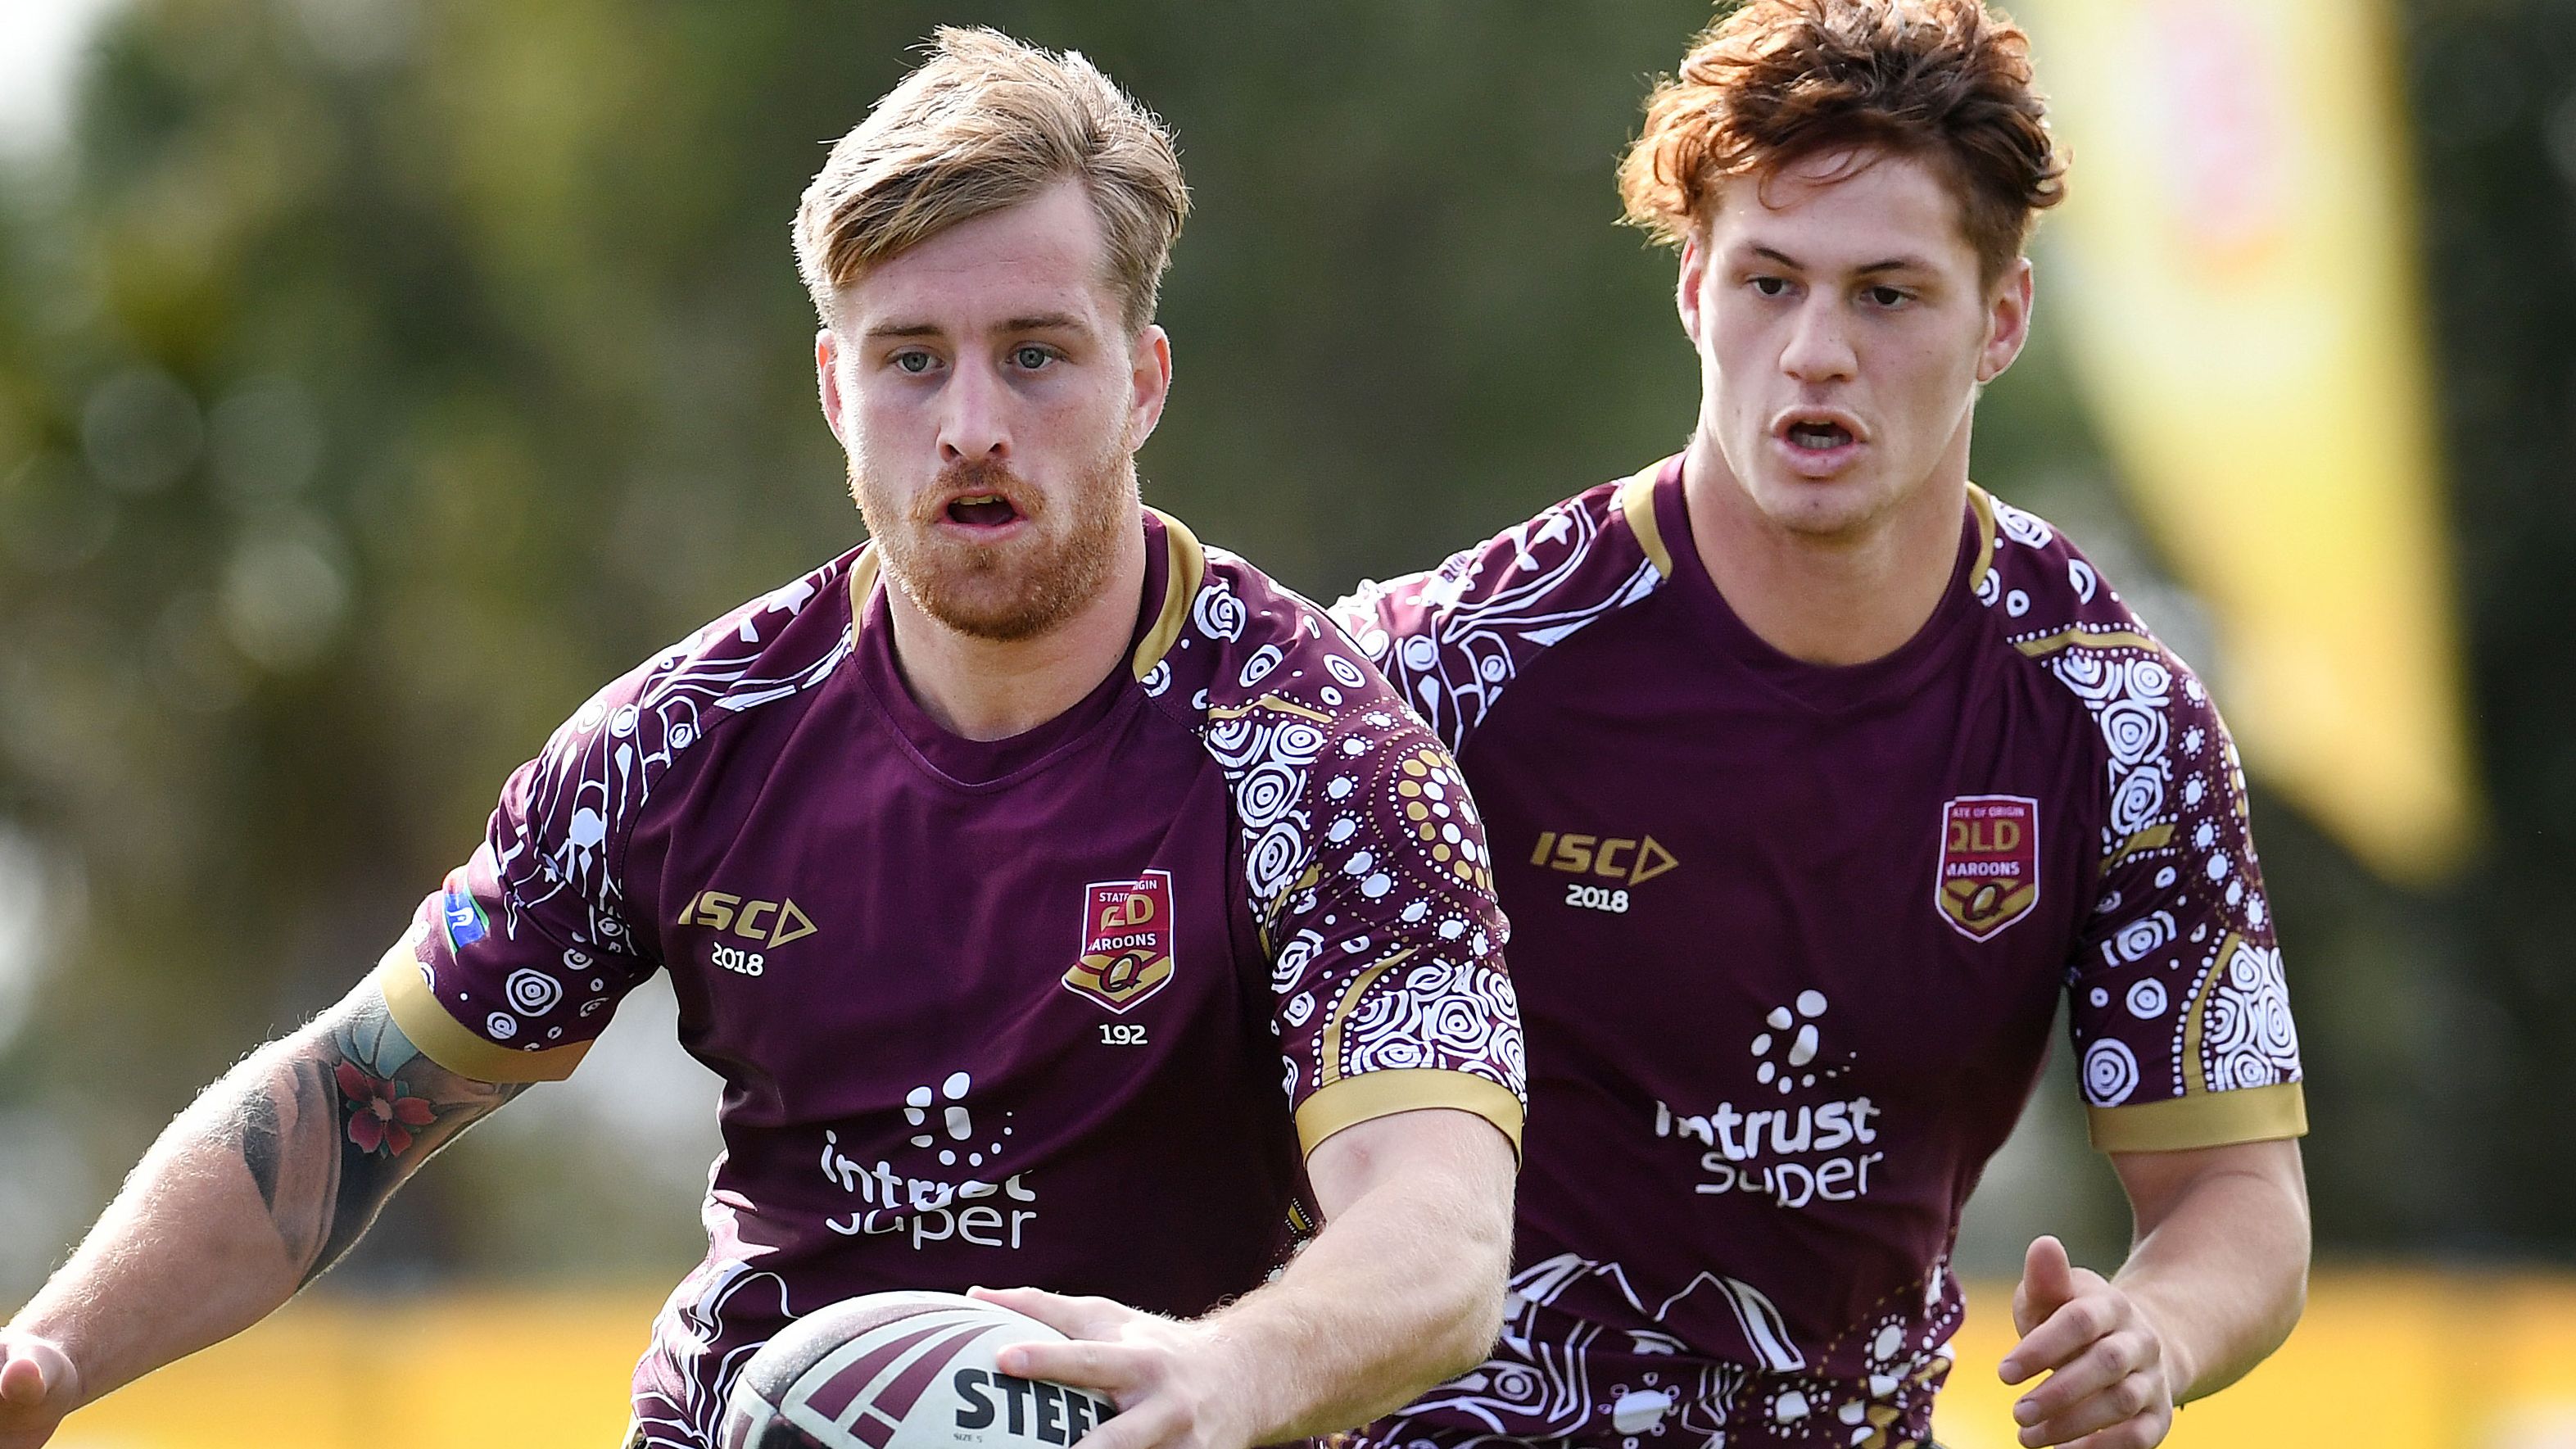 Queensland assistant coach Cameron Smith reveals what Maroons spine will look like